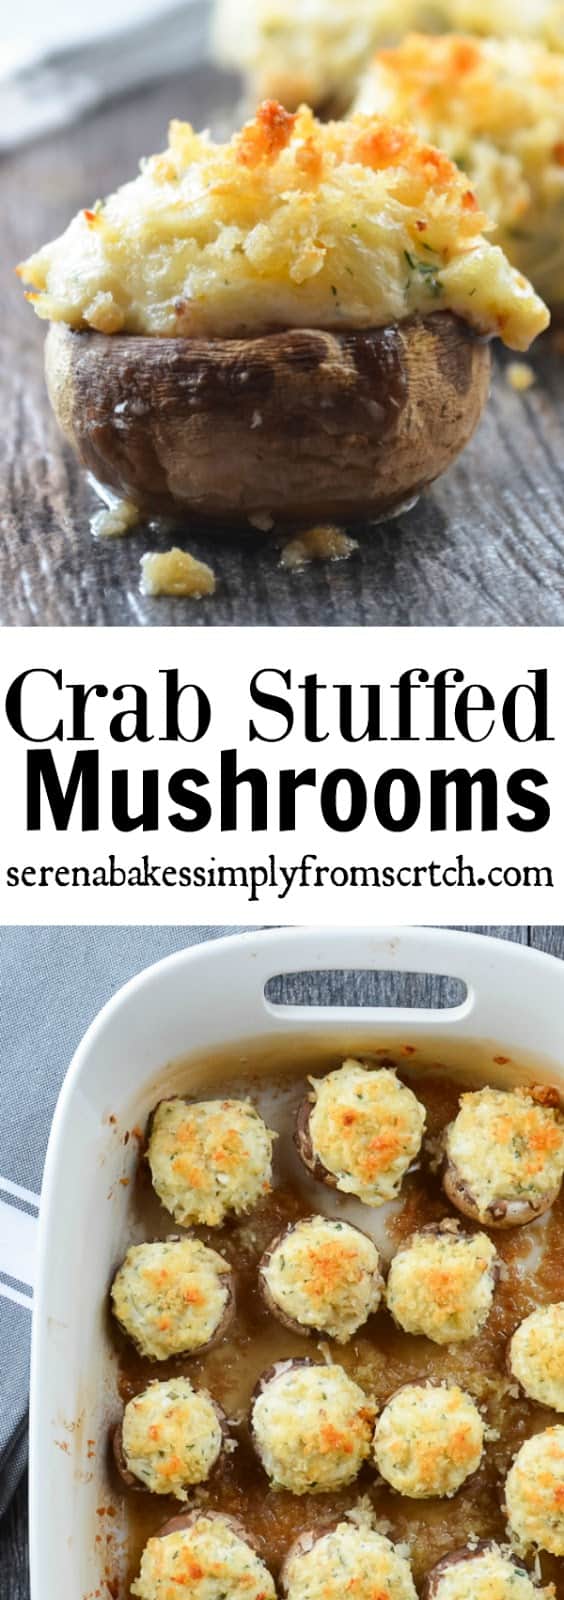 Crab Stuffed Mushrooms- Creamy, cheesy, herb and crab filling is used to stuff mushrooms and then covered in a crunch panko bread crumb topping! A favorite appetizer recipe for Christmas and Thanksgiving from Serena Bakes Simply From Scratch